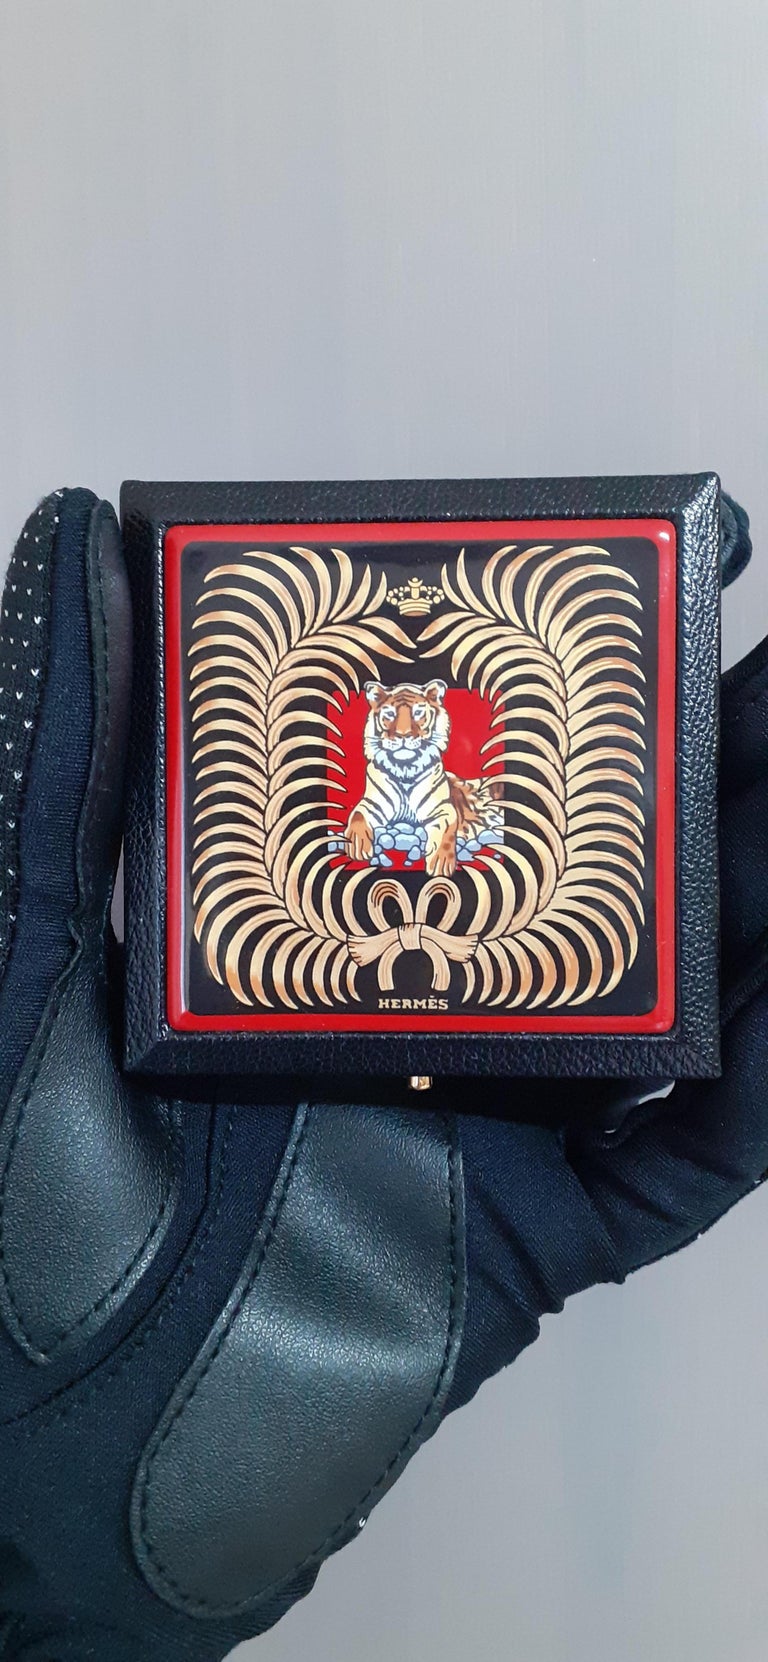 Exceptional Hermès Enamel and Leather Powder Compact Tigre Royal Print RARE For Sale 9